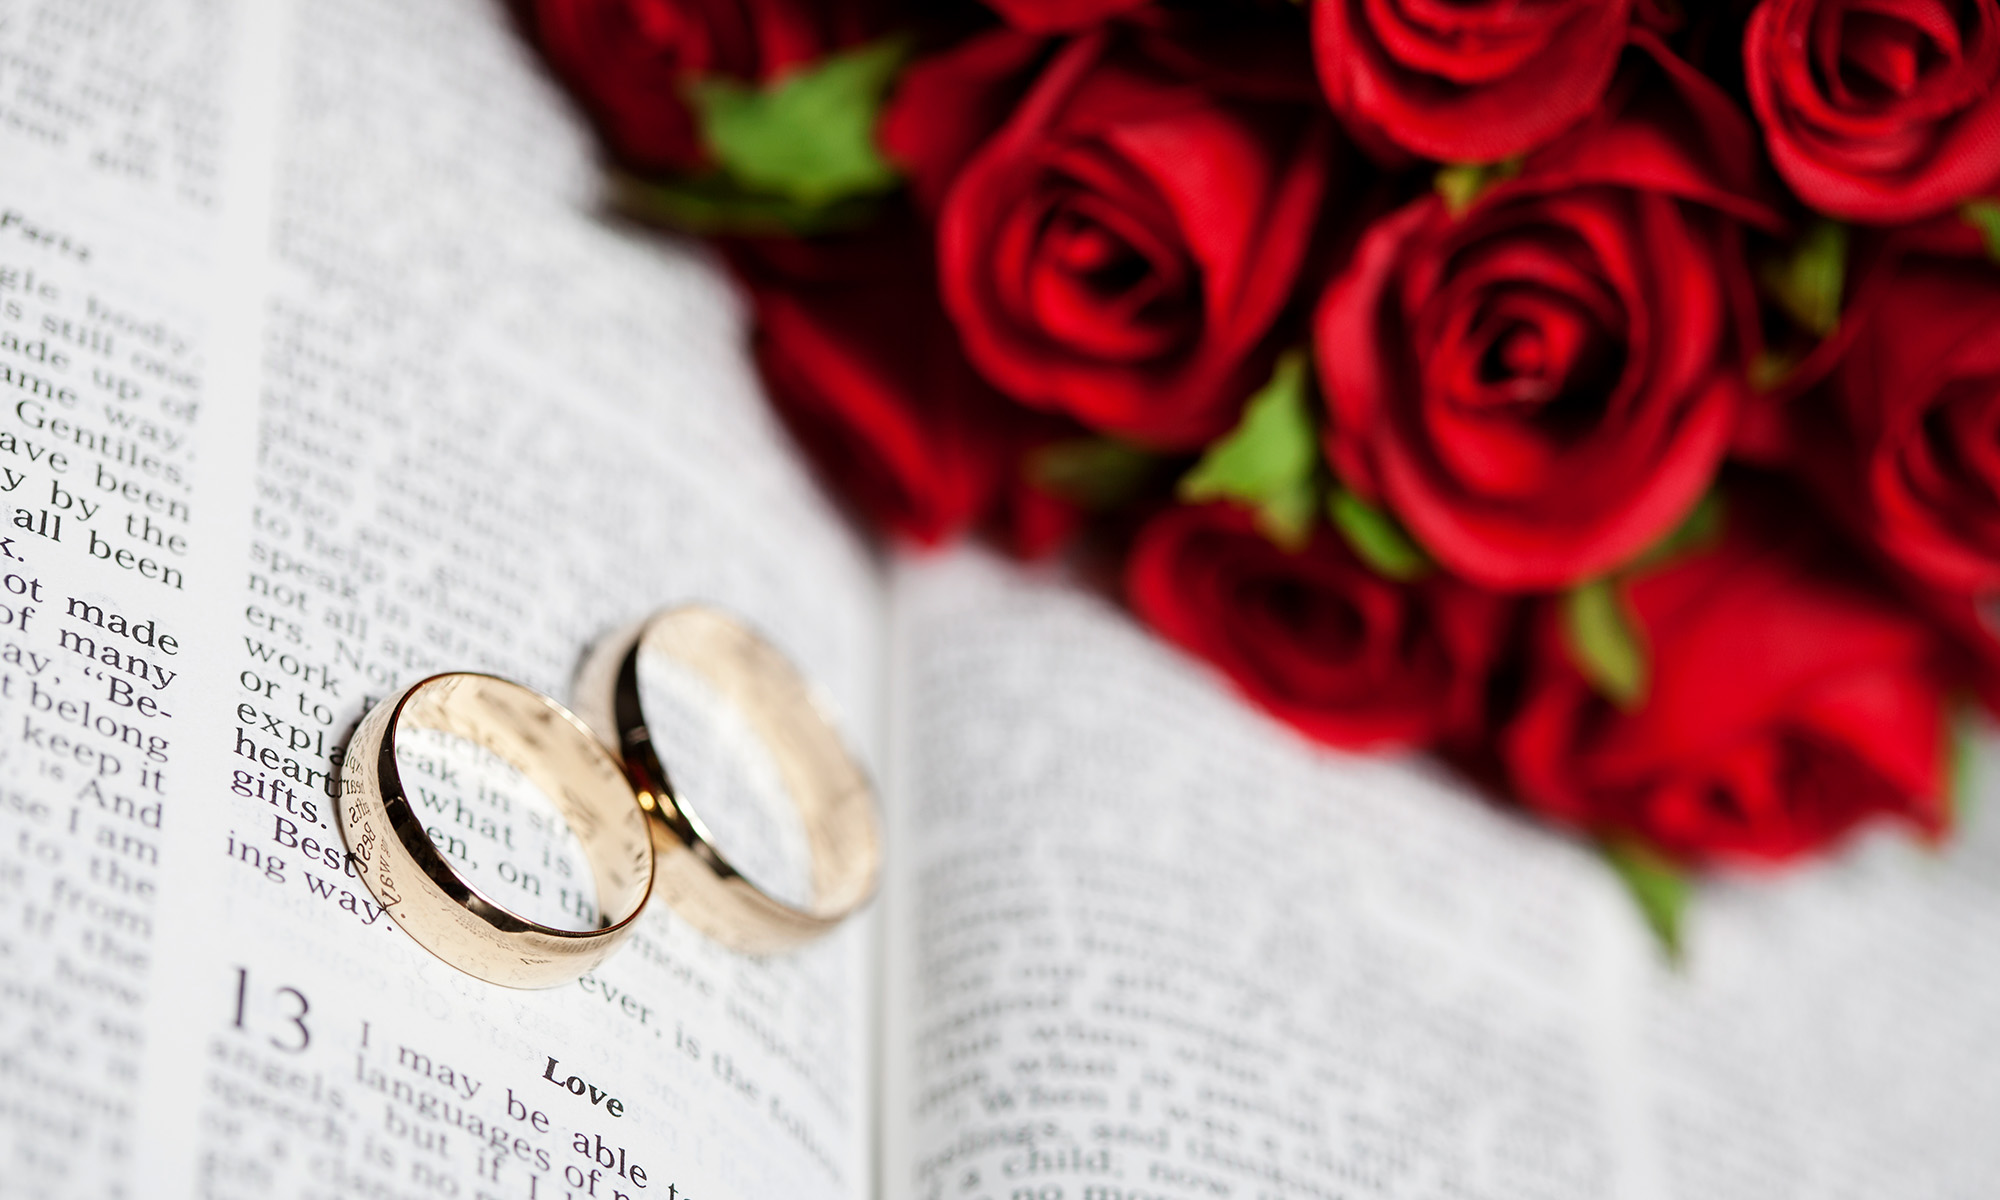 Wedding rings with Bible open at 1 Corinthians 13, with roses